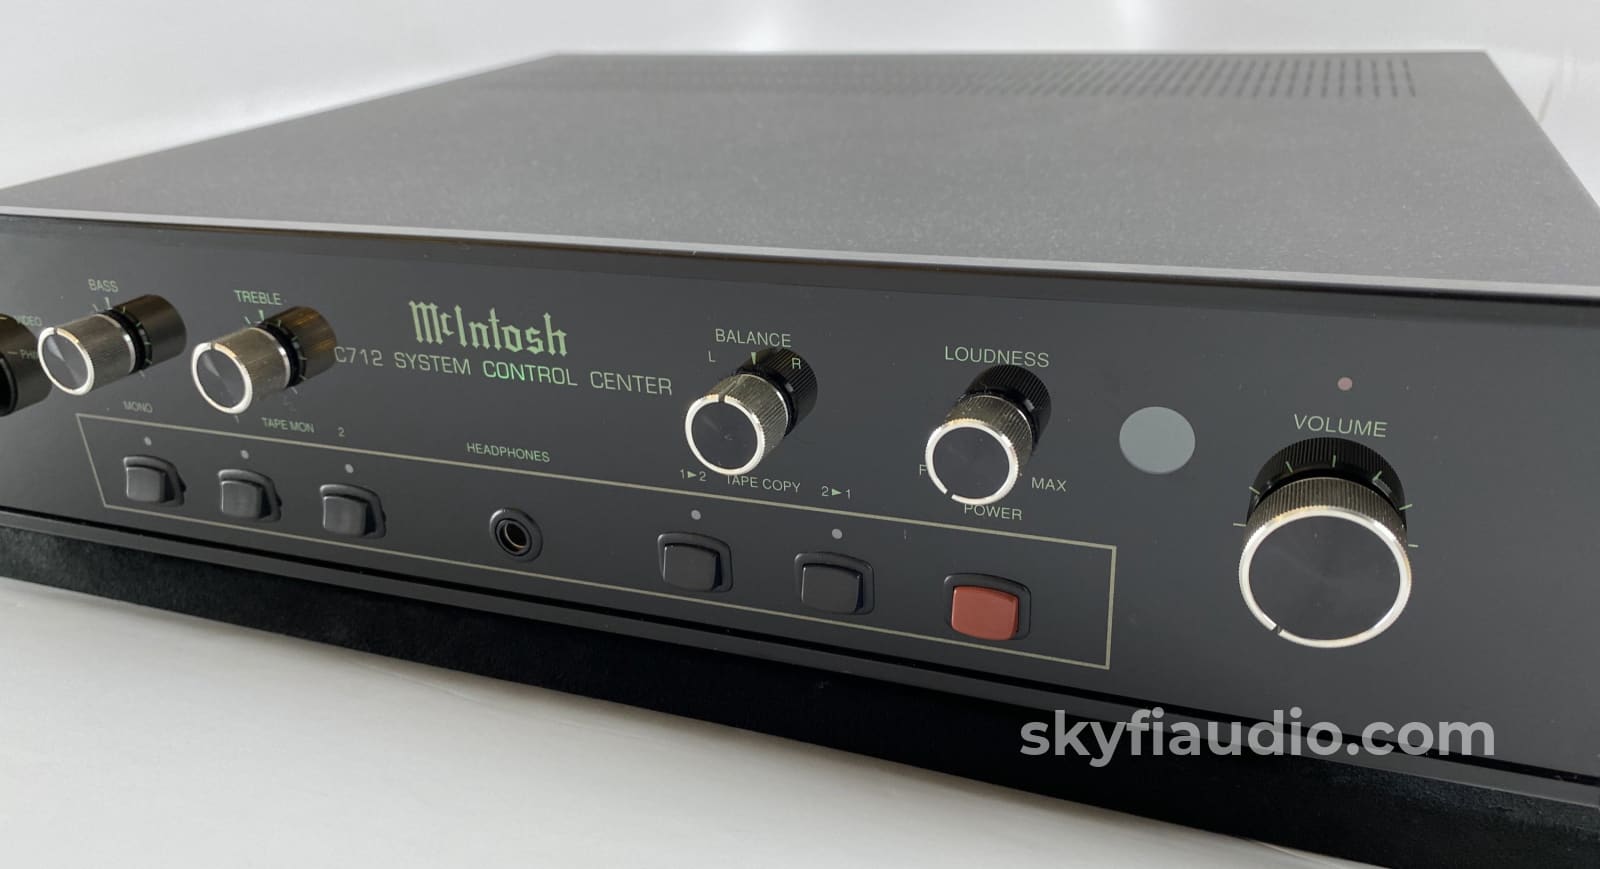 Mcintosh C712 Preamplifier With Original Remote And Phono Input